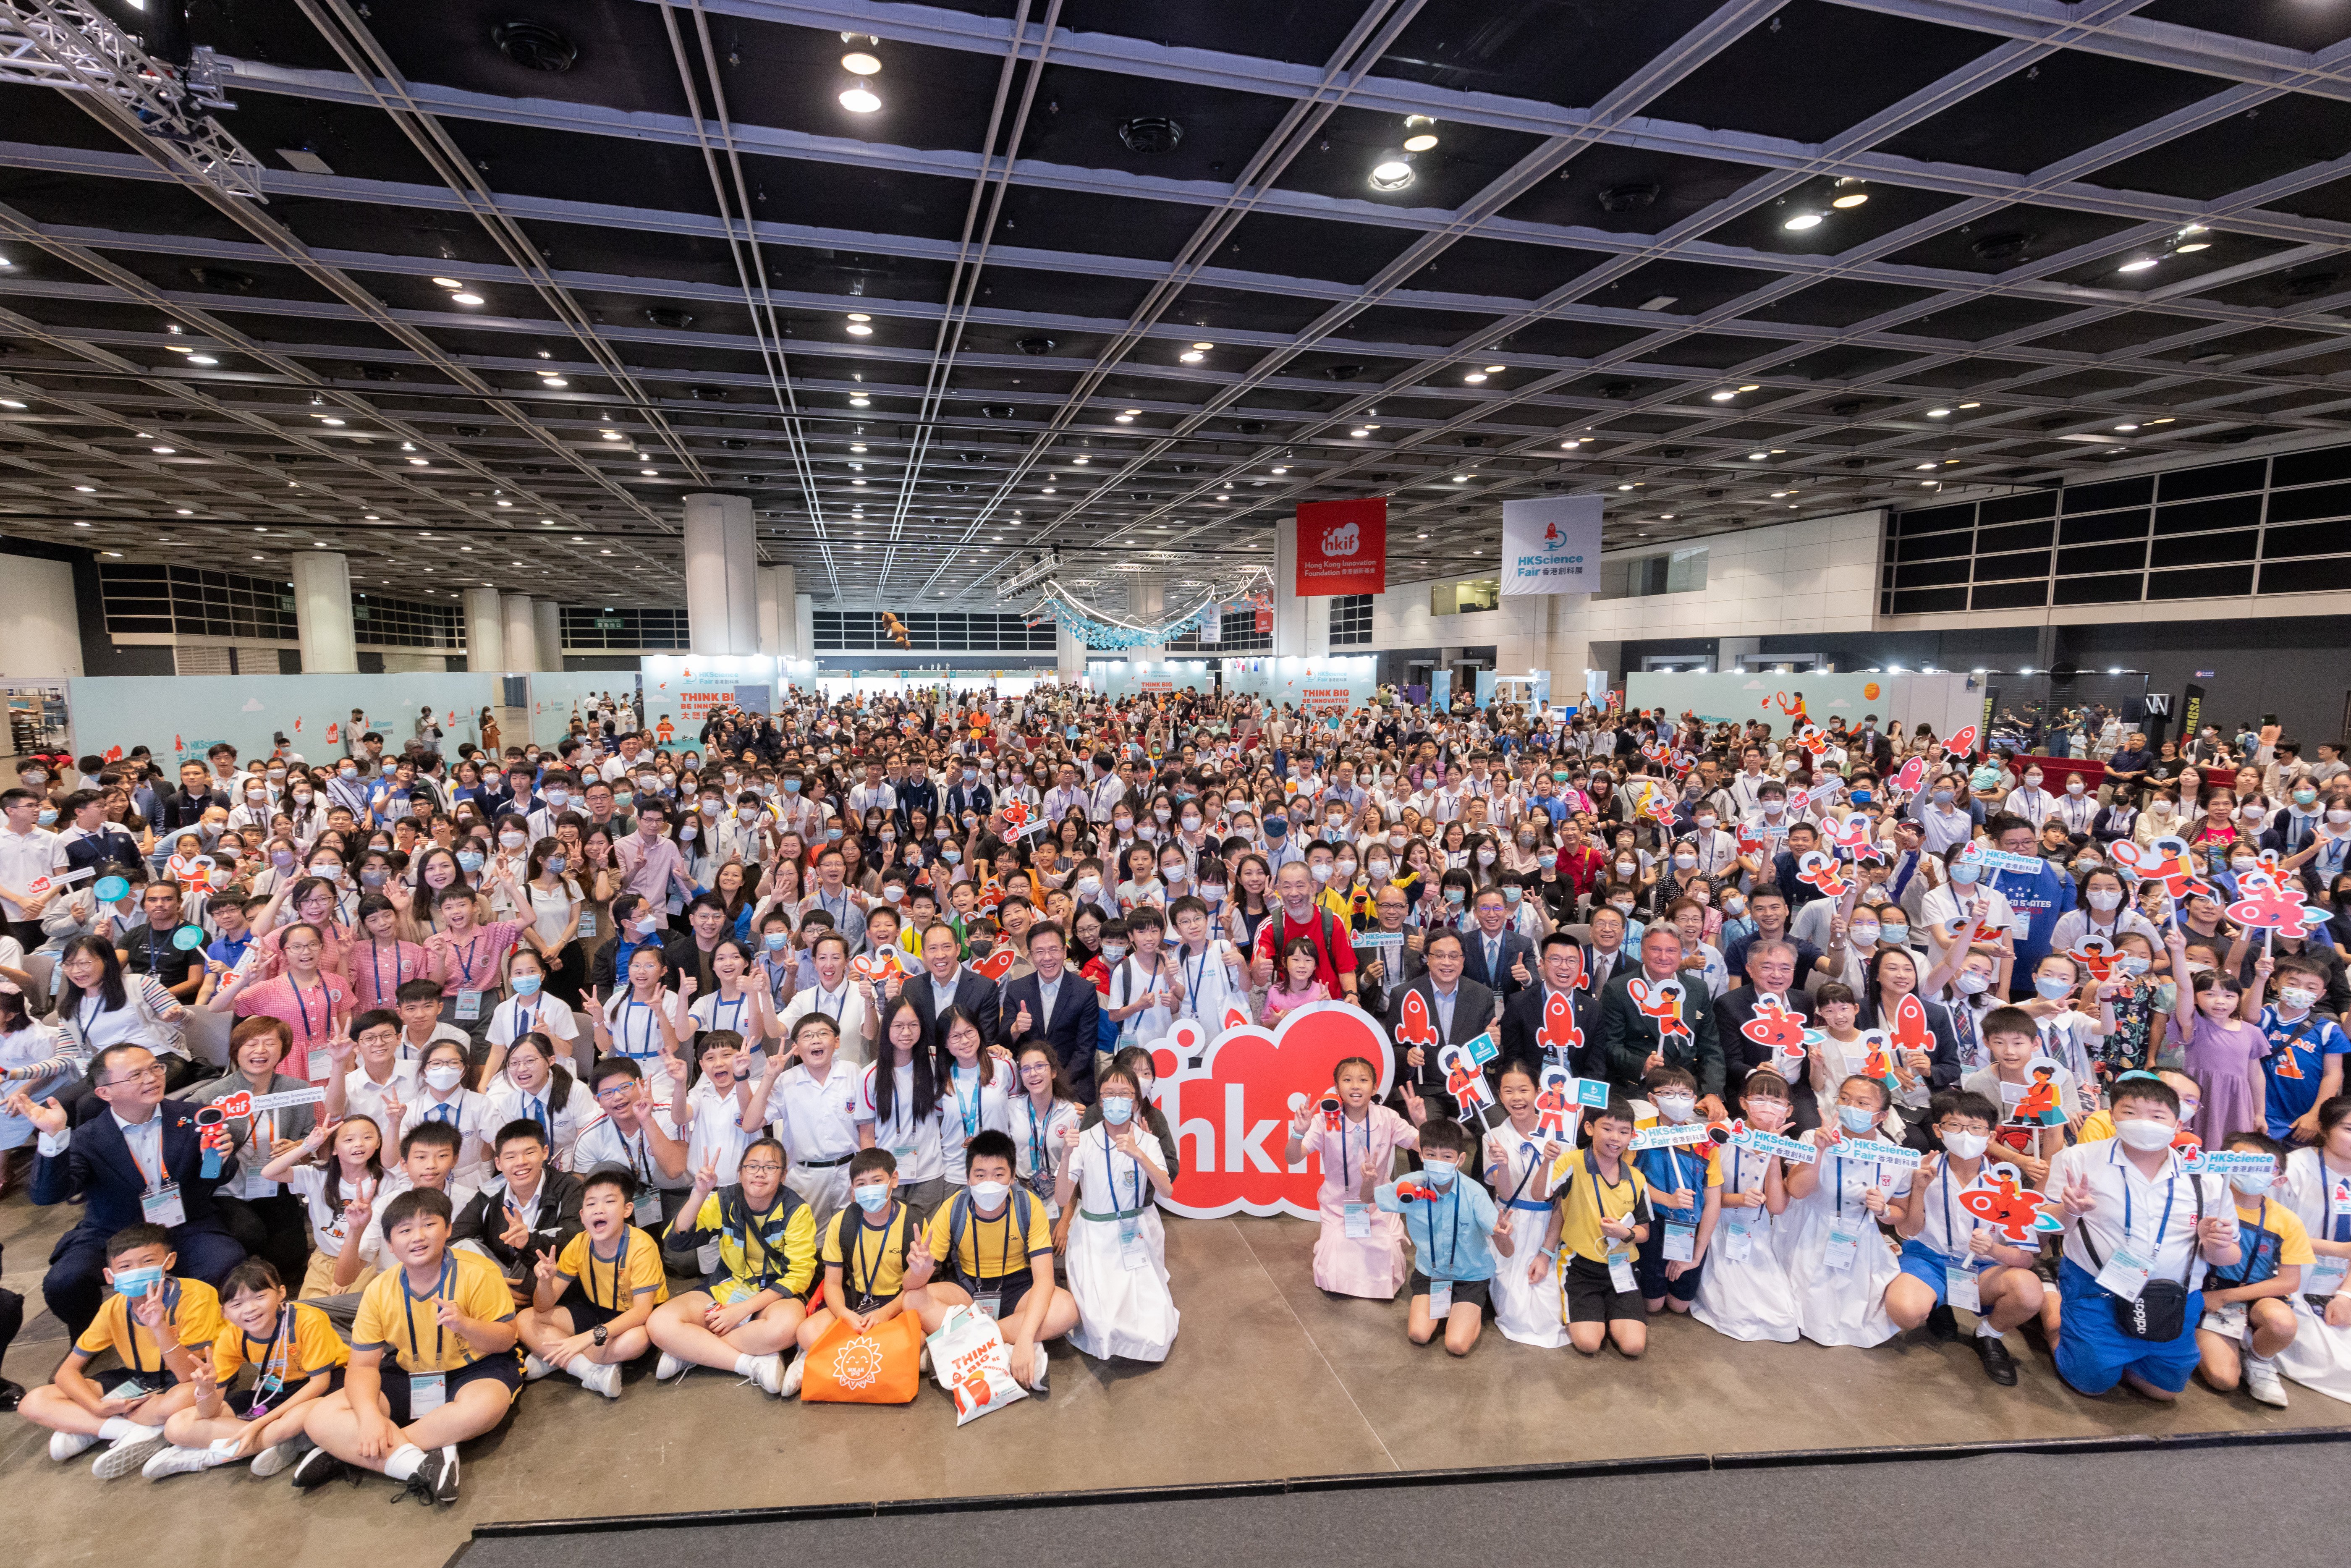 The two-day Hong Kong Science Fair attracted over 20,000 visitors.